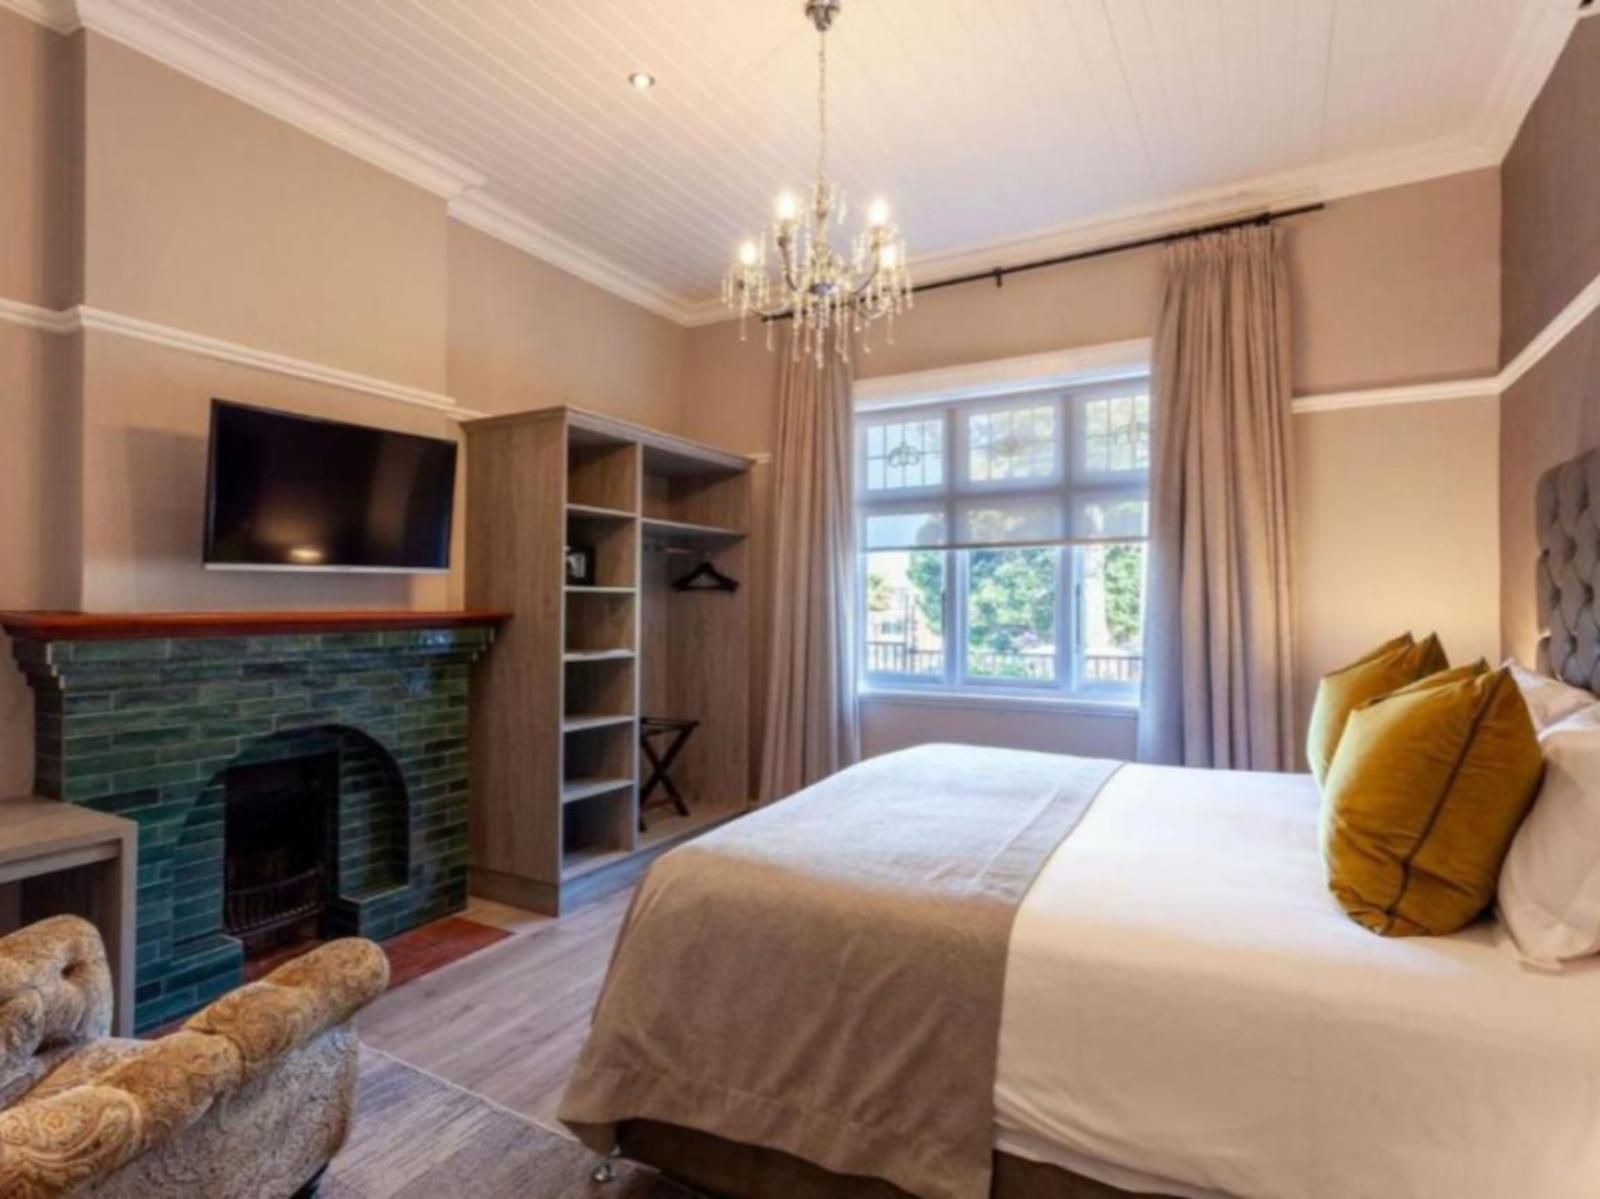 Cloud 9 Boutique Hotel And Spa Tamboerskloof Cape Town Western Cape South Africa Bedroom